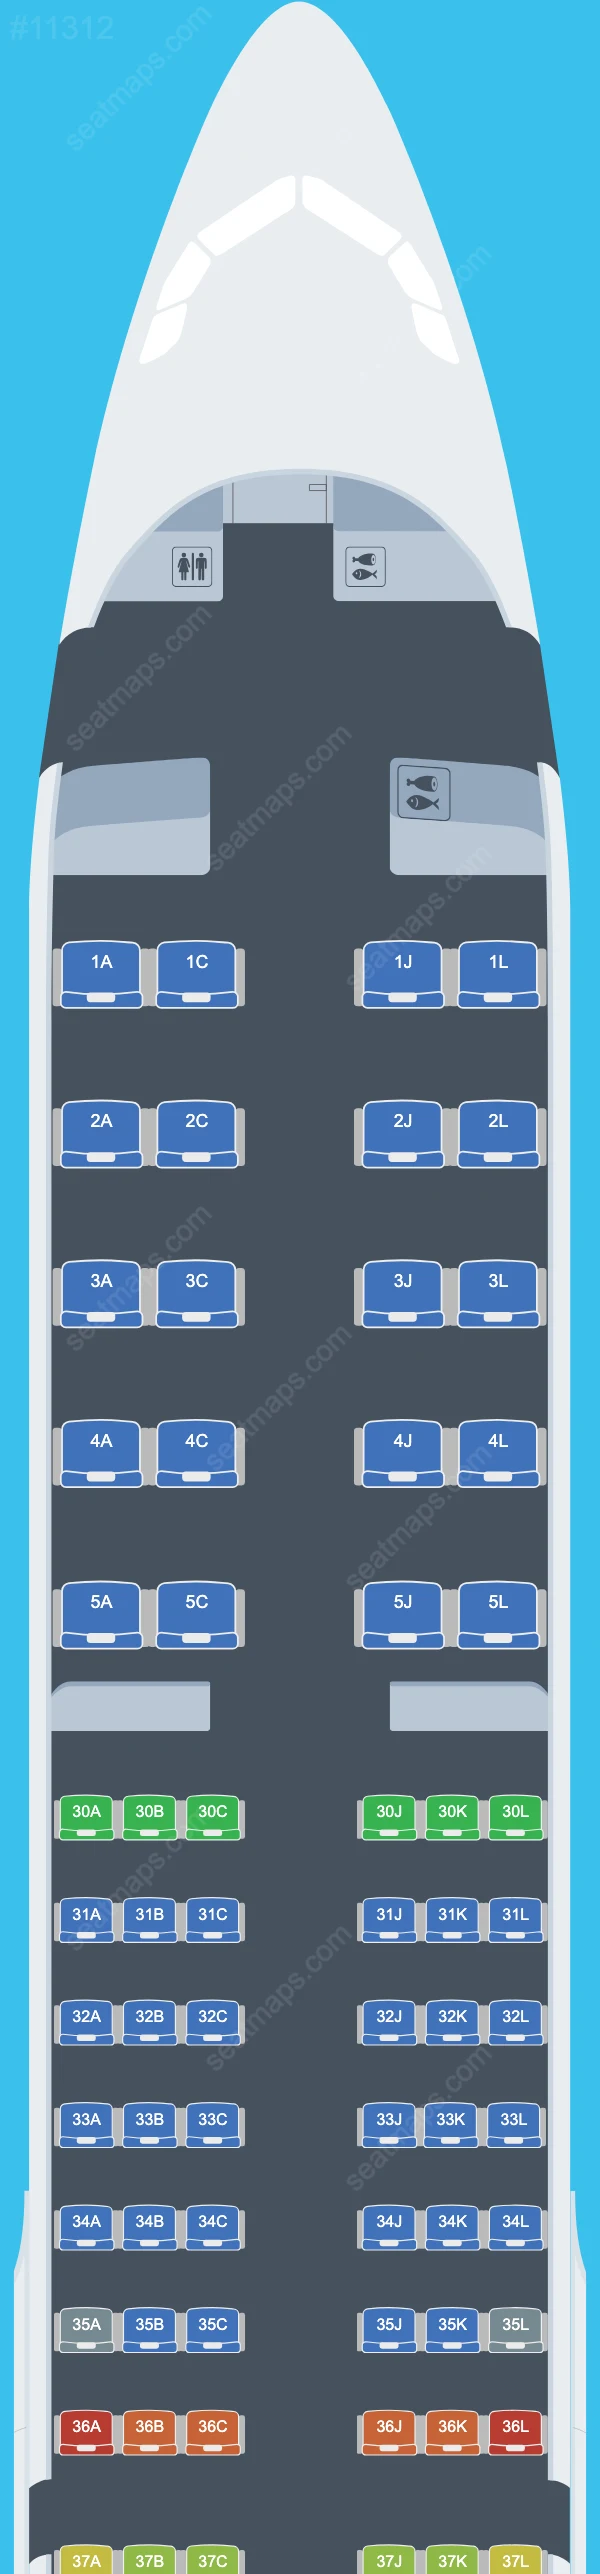 Saudia Airbus A321-200neo LR seatmap mobile preview